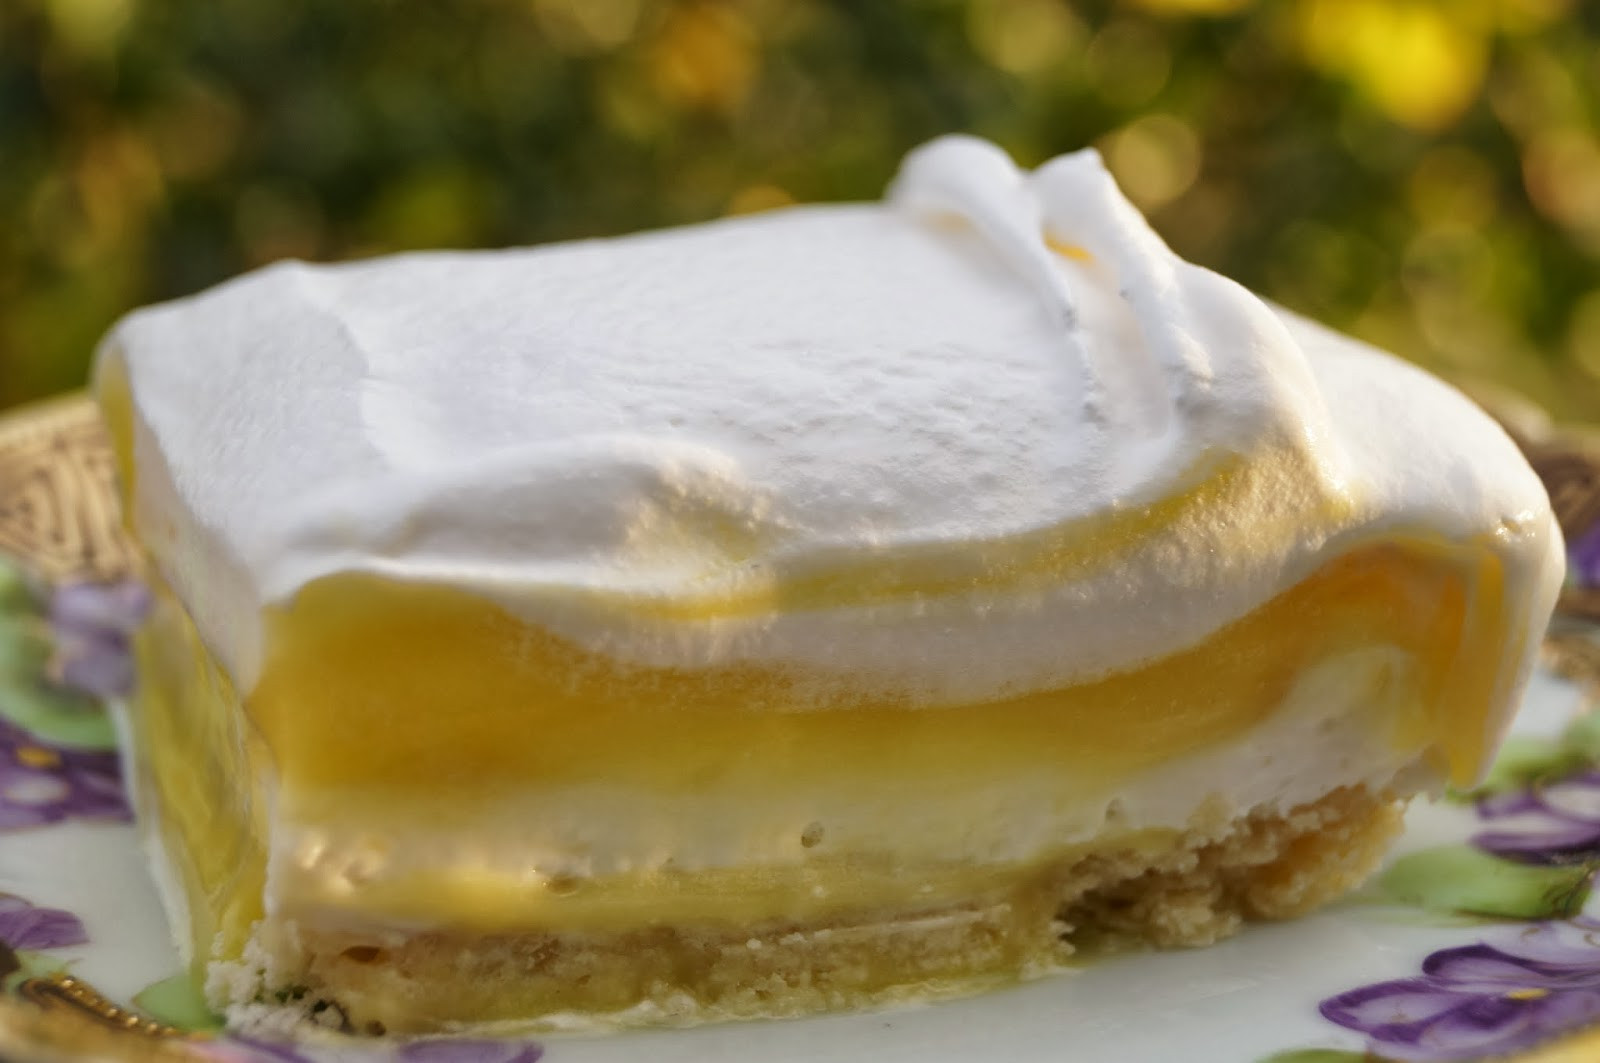 Desserts Using Cream Cheese Awesome Ally S Sweet and Savory Eats Lemon Cream Cheese Dessert